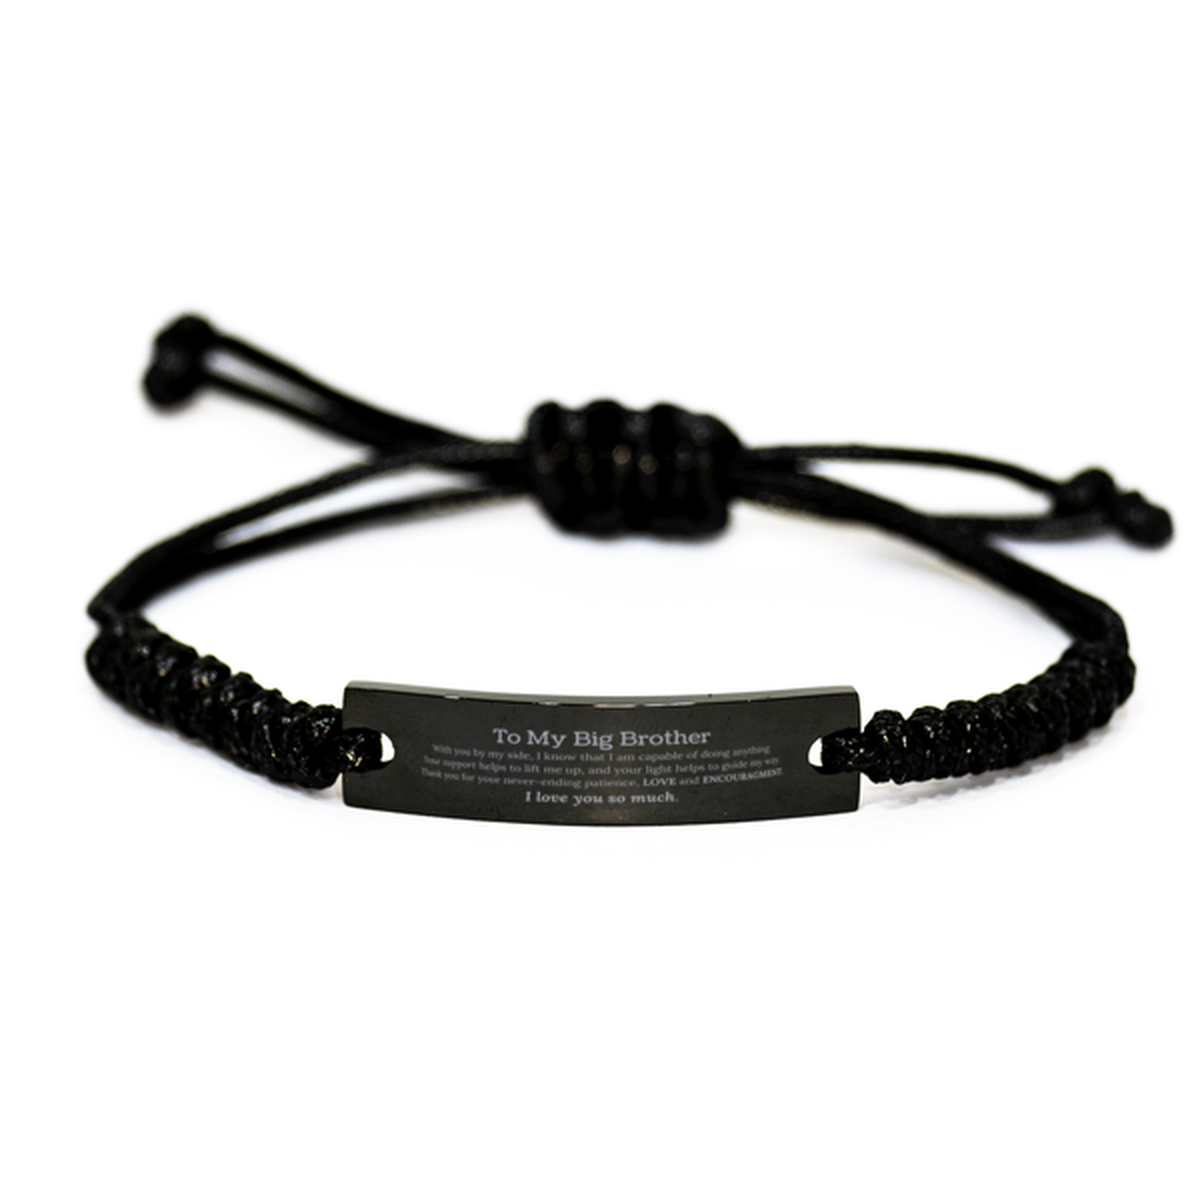 Appreciation Big Brother Black Rope Bracelet Gifts, To My Big Brother Birthday Christmas Wedding Keepsake Gifts for Big Brother With you by my side, I know that I am capable of doing anything. I love you so much